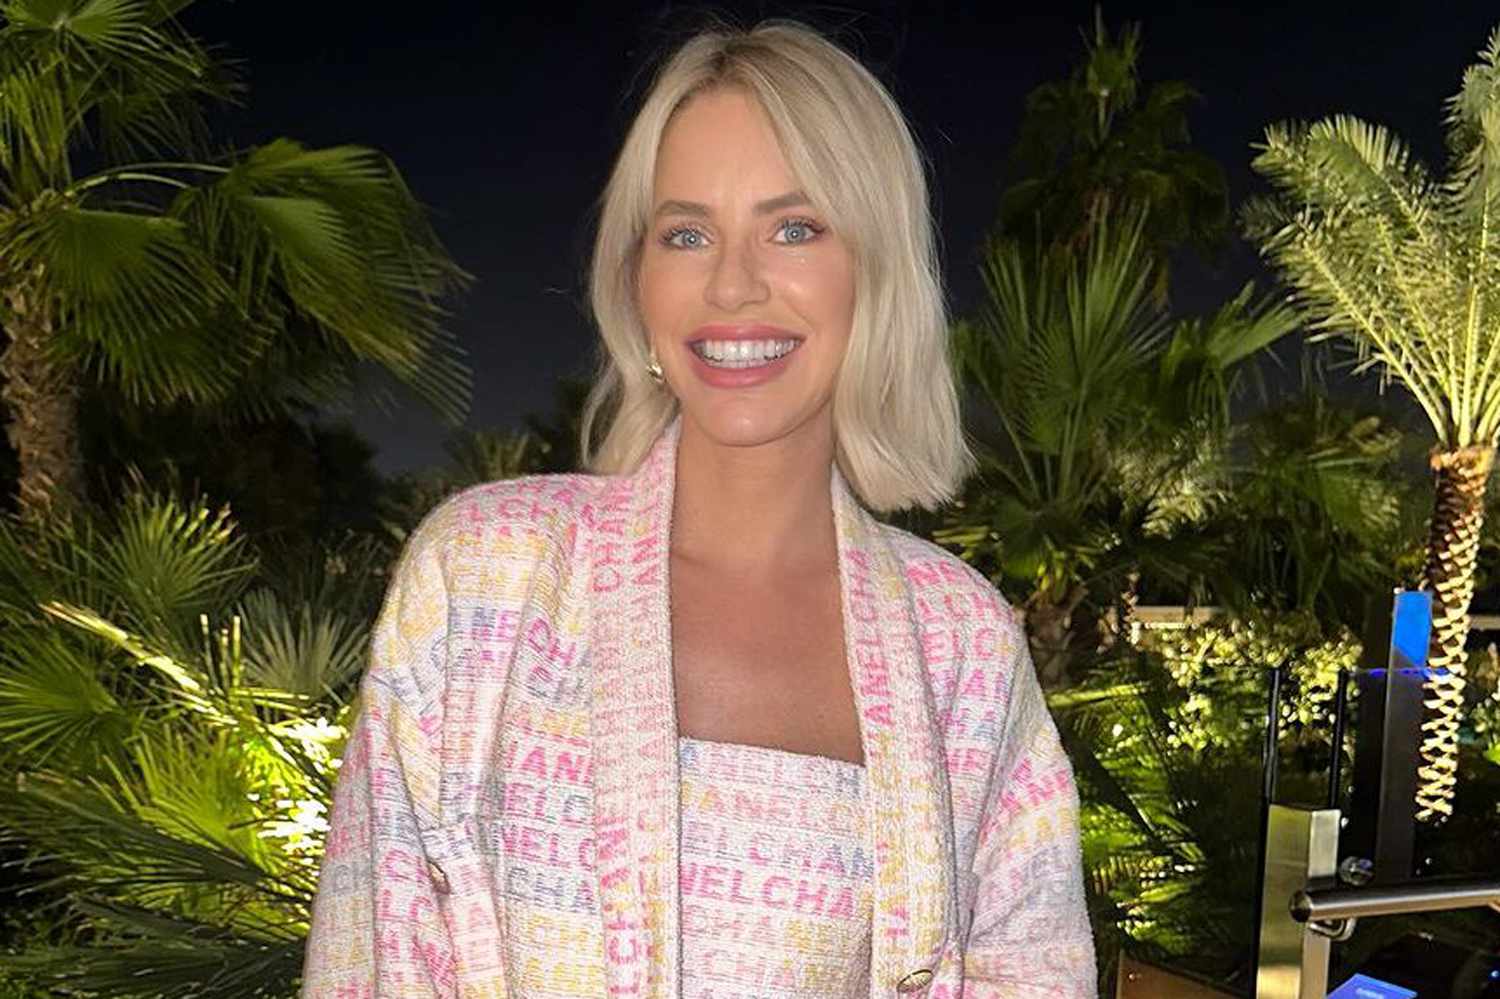 Caroline Stanbury Used Ozempic to Lose 18 Lbs. She Gained During IVF [Video]